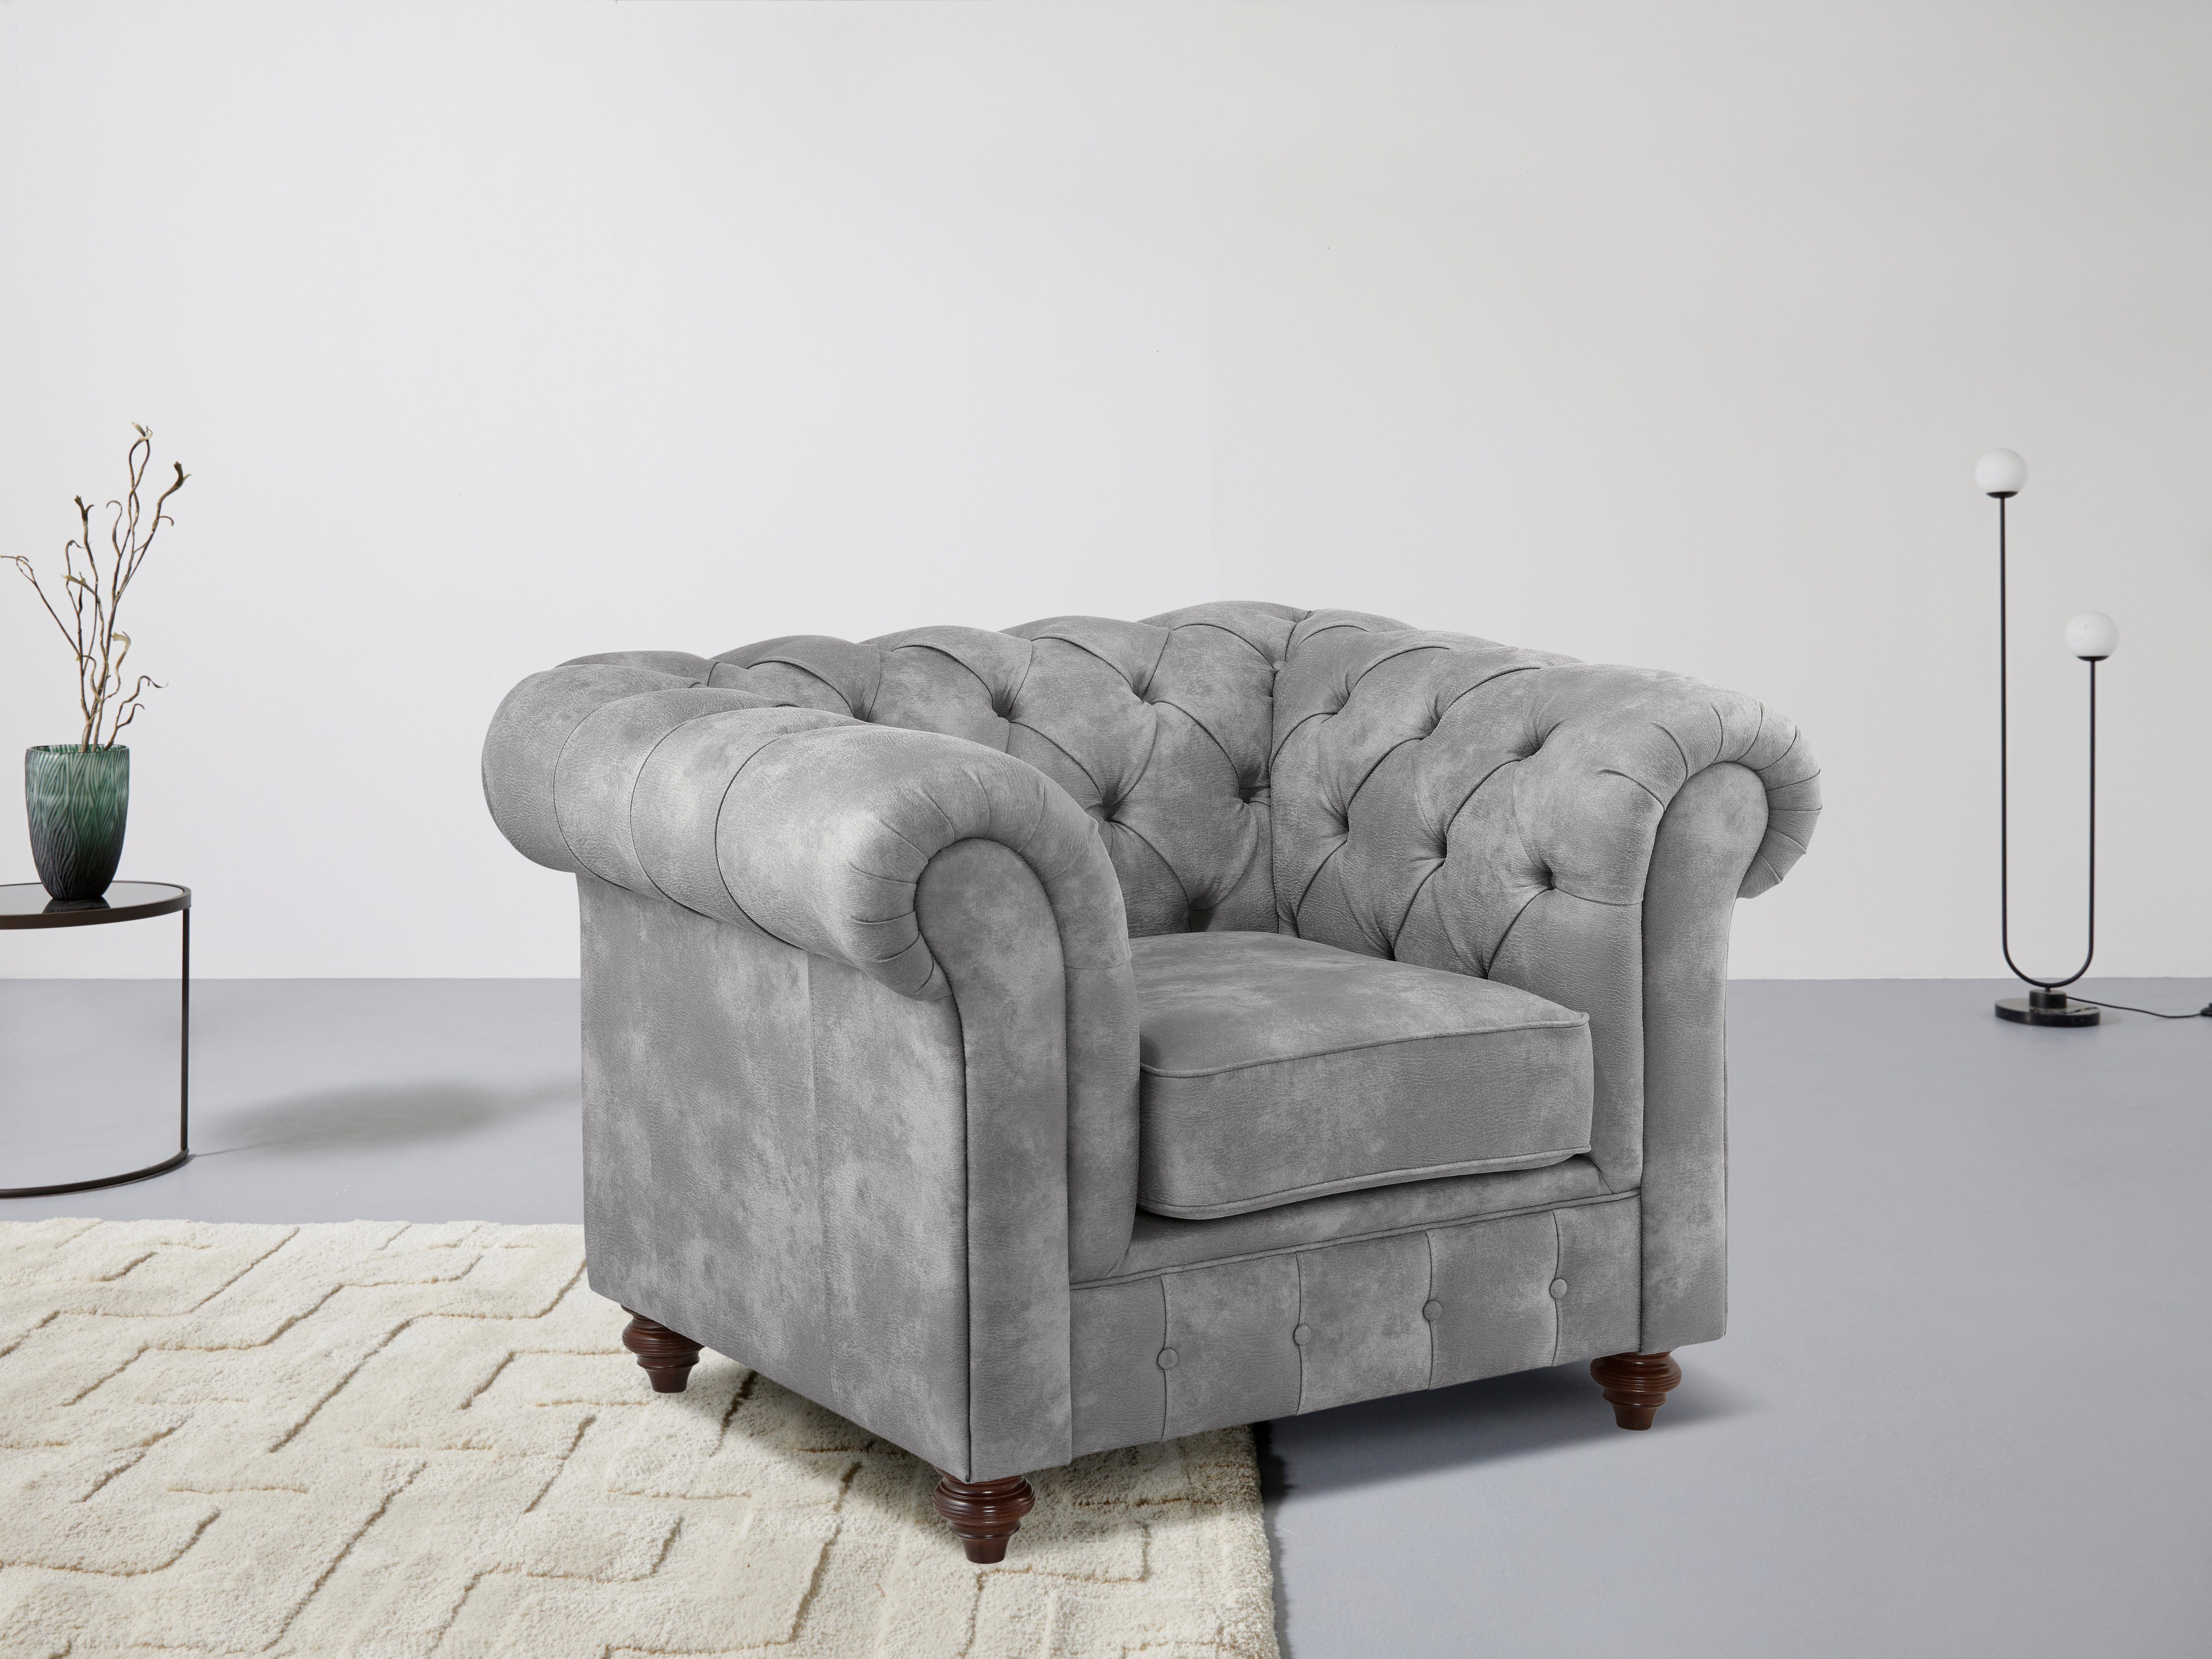 Premium collection by Home affaire Fauteuil CHESTERFIELD met knoopsluiting, ook in leer